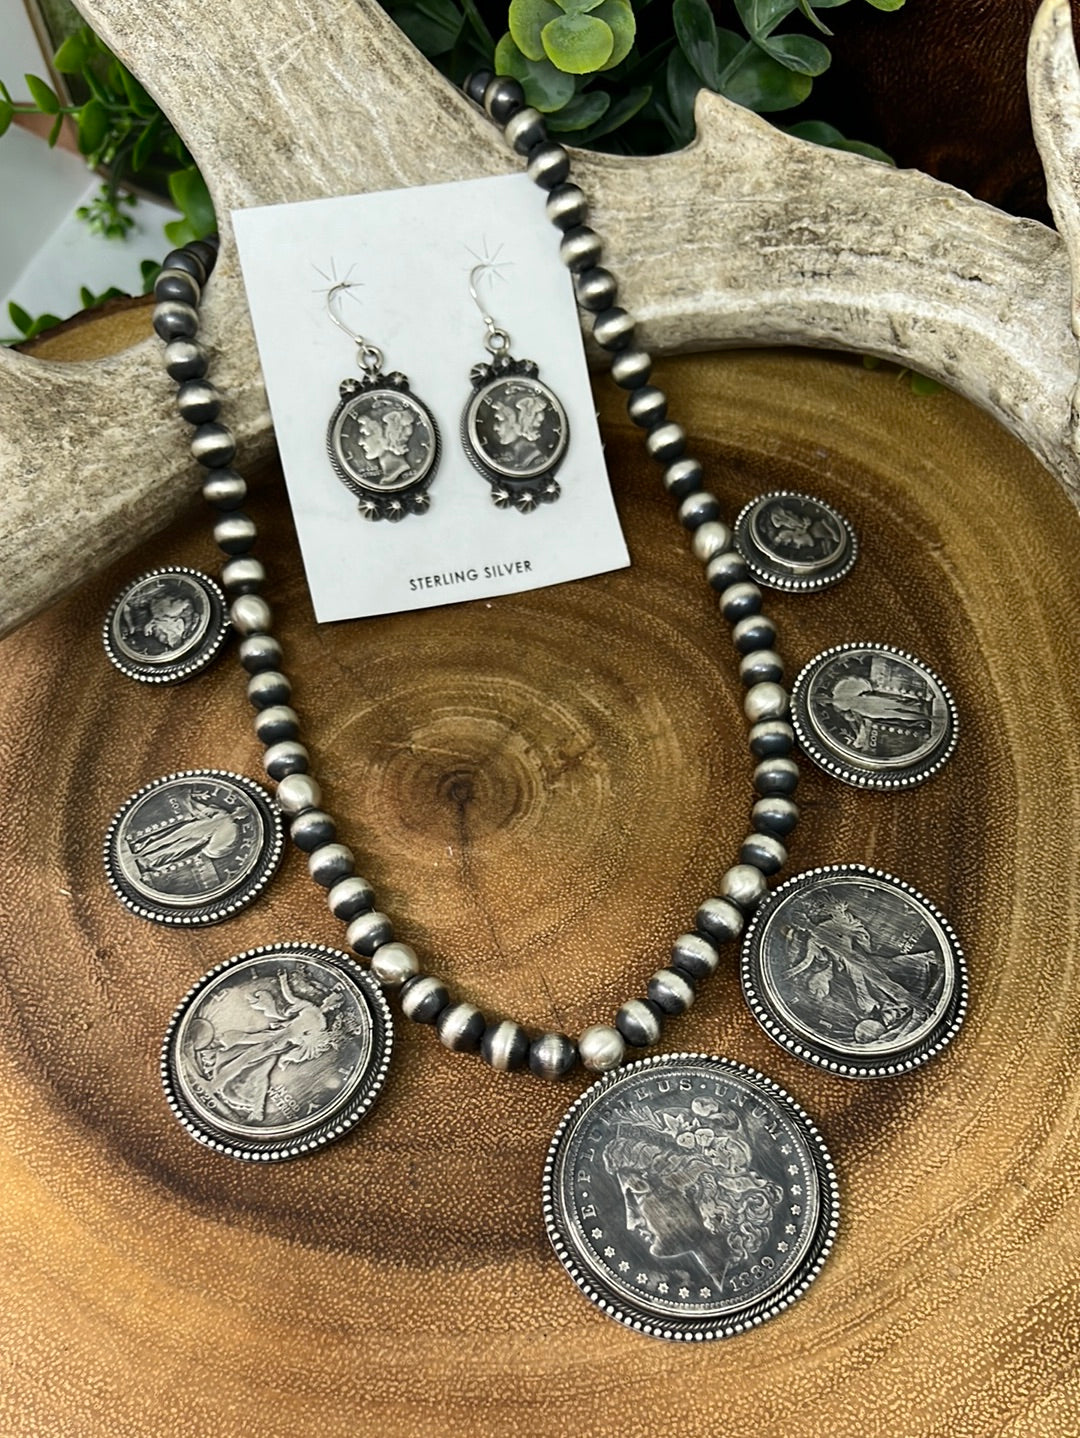 4 Piece Best Friend Necklace, I Love You Hands in ASL Cut on a Half Dollar  - Etsy | Best friend necklaces, Friend necklaces, Bff necklaces